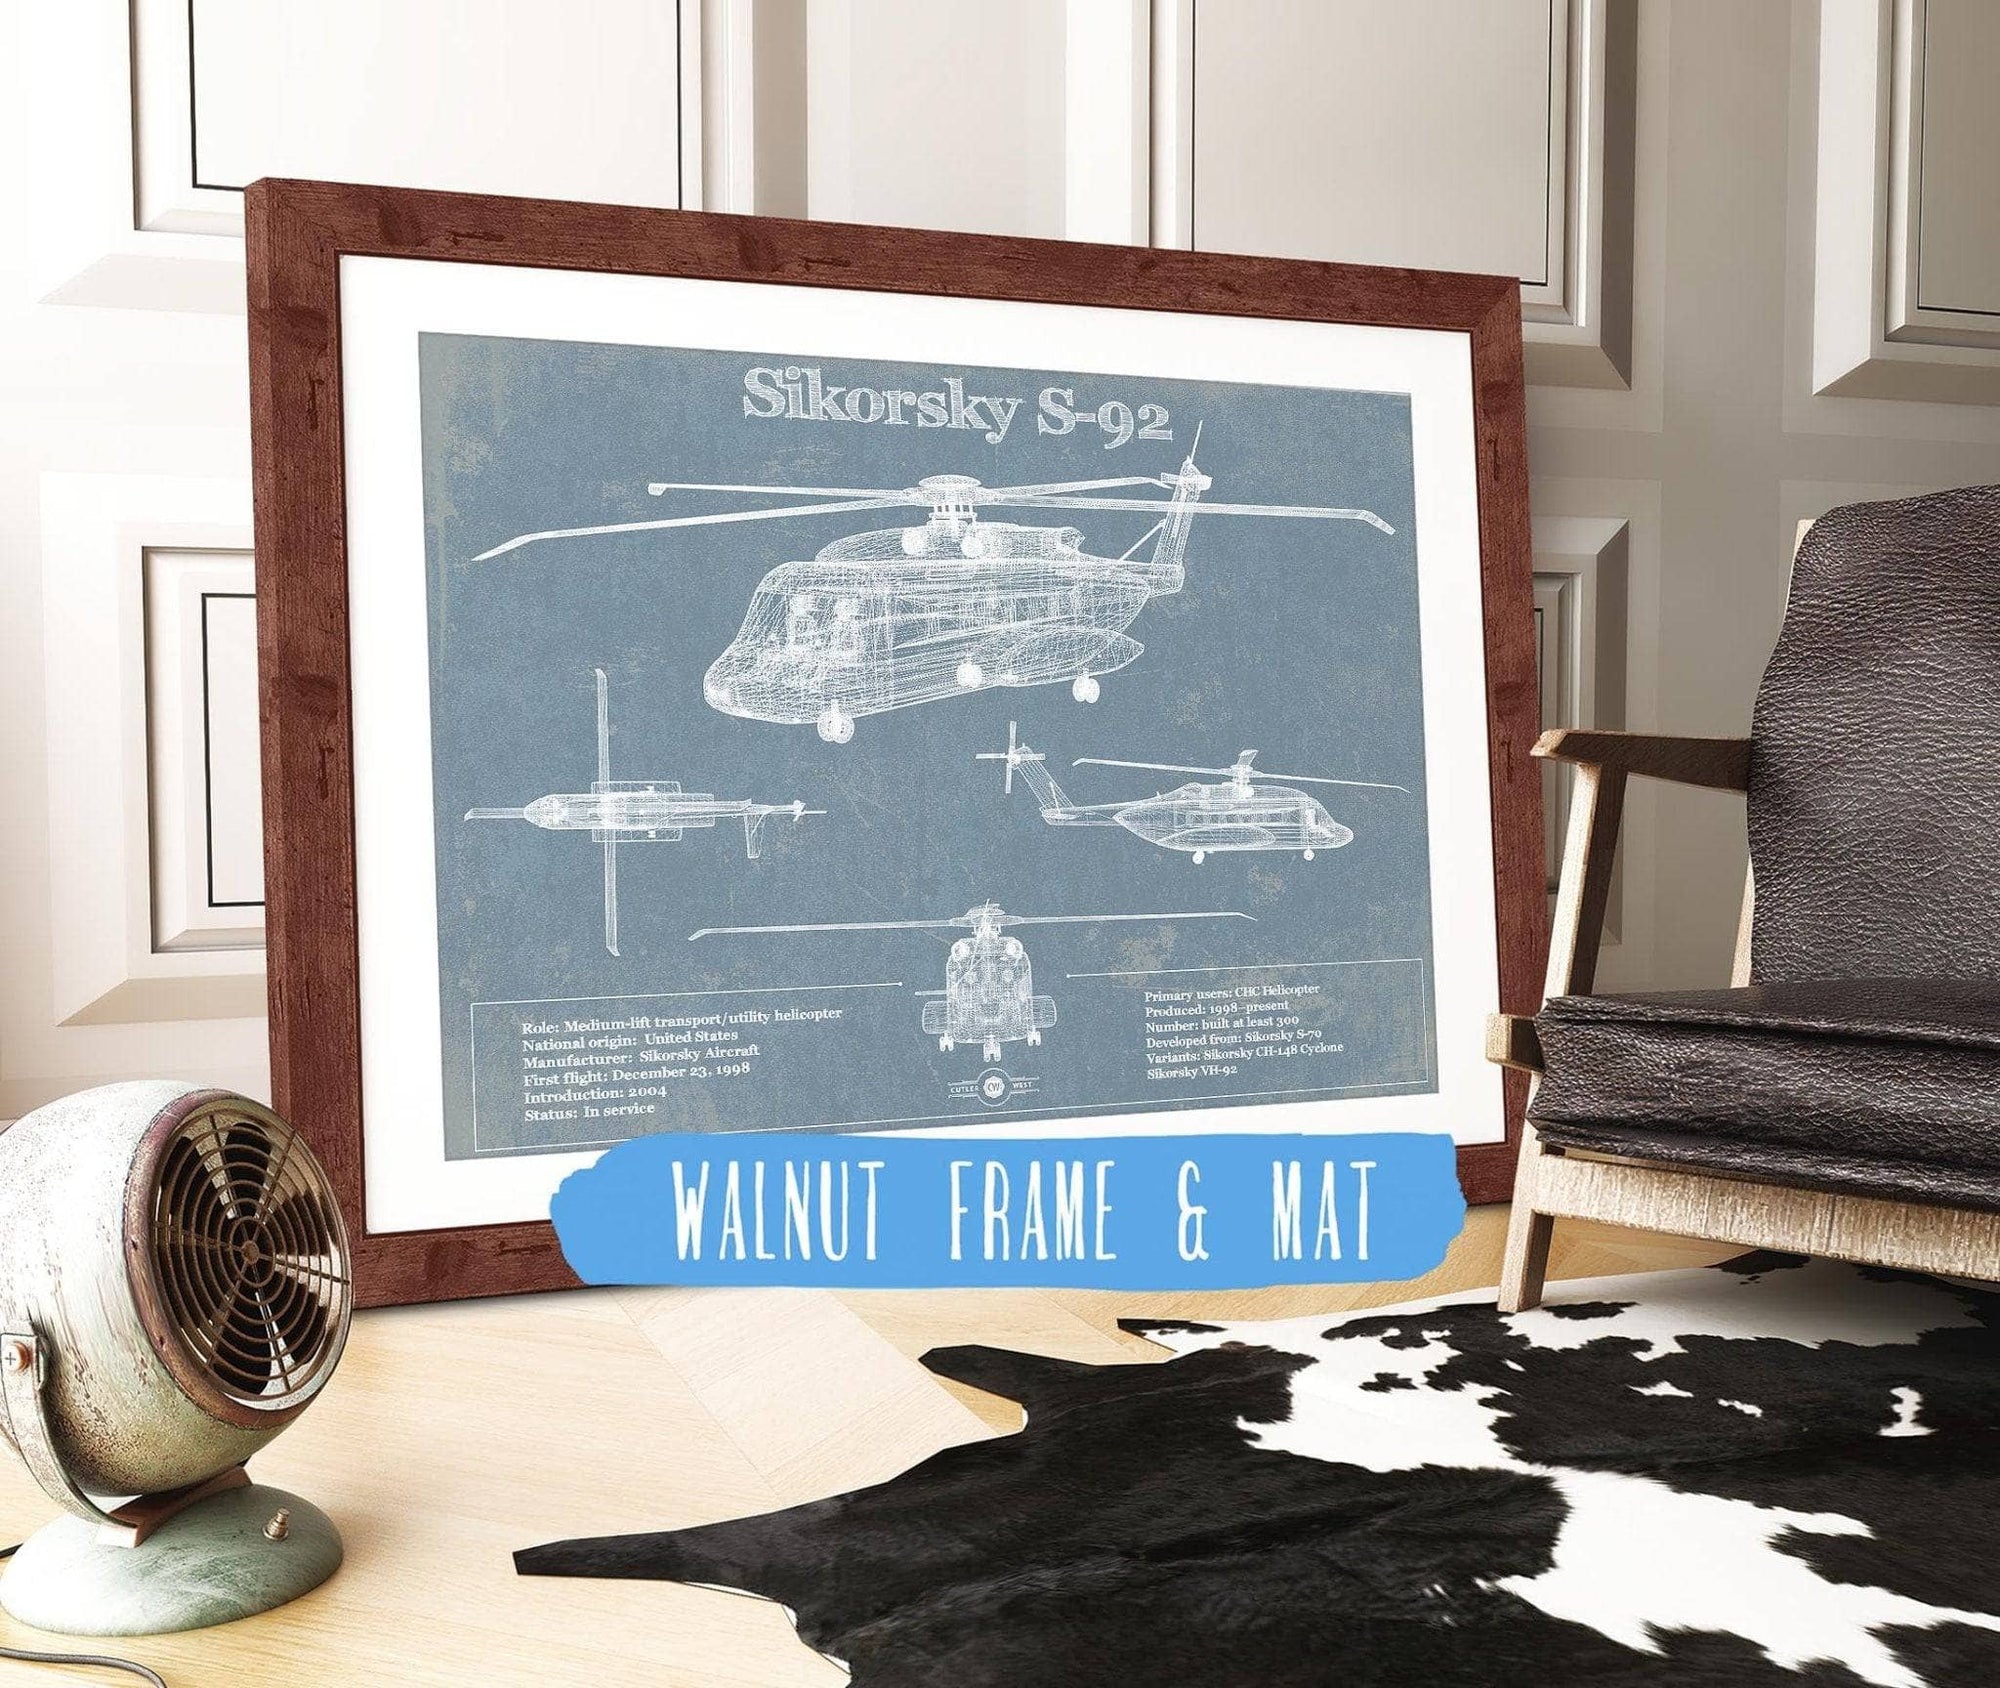 Cutler West Military Aircraft 14" x 11" / Walnut Frame & Mat Sikorsky S-92 Helicopter Vintage Aviation Blueprint Military Print 833110073_19850